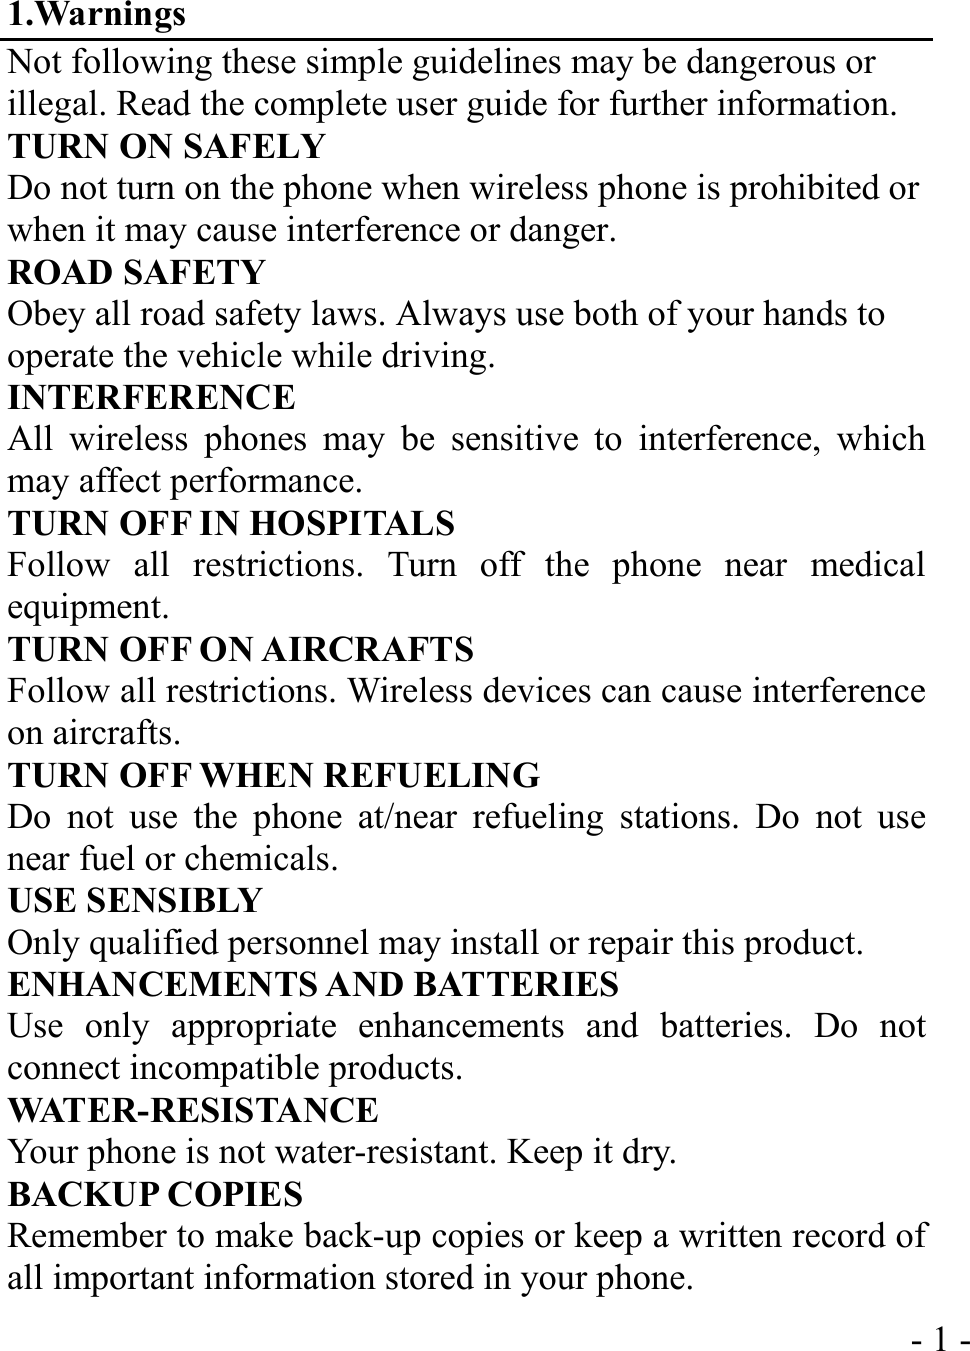  - 1 -1.Warnings Not following these simple guidelines may be dangerous or illegal. Read the complete user guide for further information. TURN ON SAFELY Do not turn on the phone when wireless phone is prohibited or when it may cause interference or danger. ROAD SAFETY Obey all road safety laws. Always use both of your hands to operate the vehicle while driving.   INTERFERENCE All wireless phones may be sensitive to interference, which may affect performance. TURN OFF IN HOSPITALS Follow all restrictions. Turn off the phone near medical equipment. TURN OFF ON AIRCRAFTS Follow all restrictions. Wireless devices can cause interference on aircrafts. TURN OFF WHEN REFUELING Do not use the phone at/near refueling stations. Do not use near fuel or chemicals. USE SENSIBLY Only qualified personnel may install or repair this product. ENHANCEMENTS AND BATTERIES Use only appropriate enhancements and batteries. Do not connect incompatible products. WATER-RESISTANCE Your phone is not water-resistant. Keep it dry. BACKUP COPIES Remember to make back-up copies or keep a written record of all important information stored in your phone. 